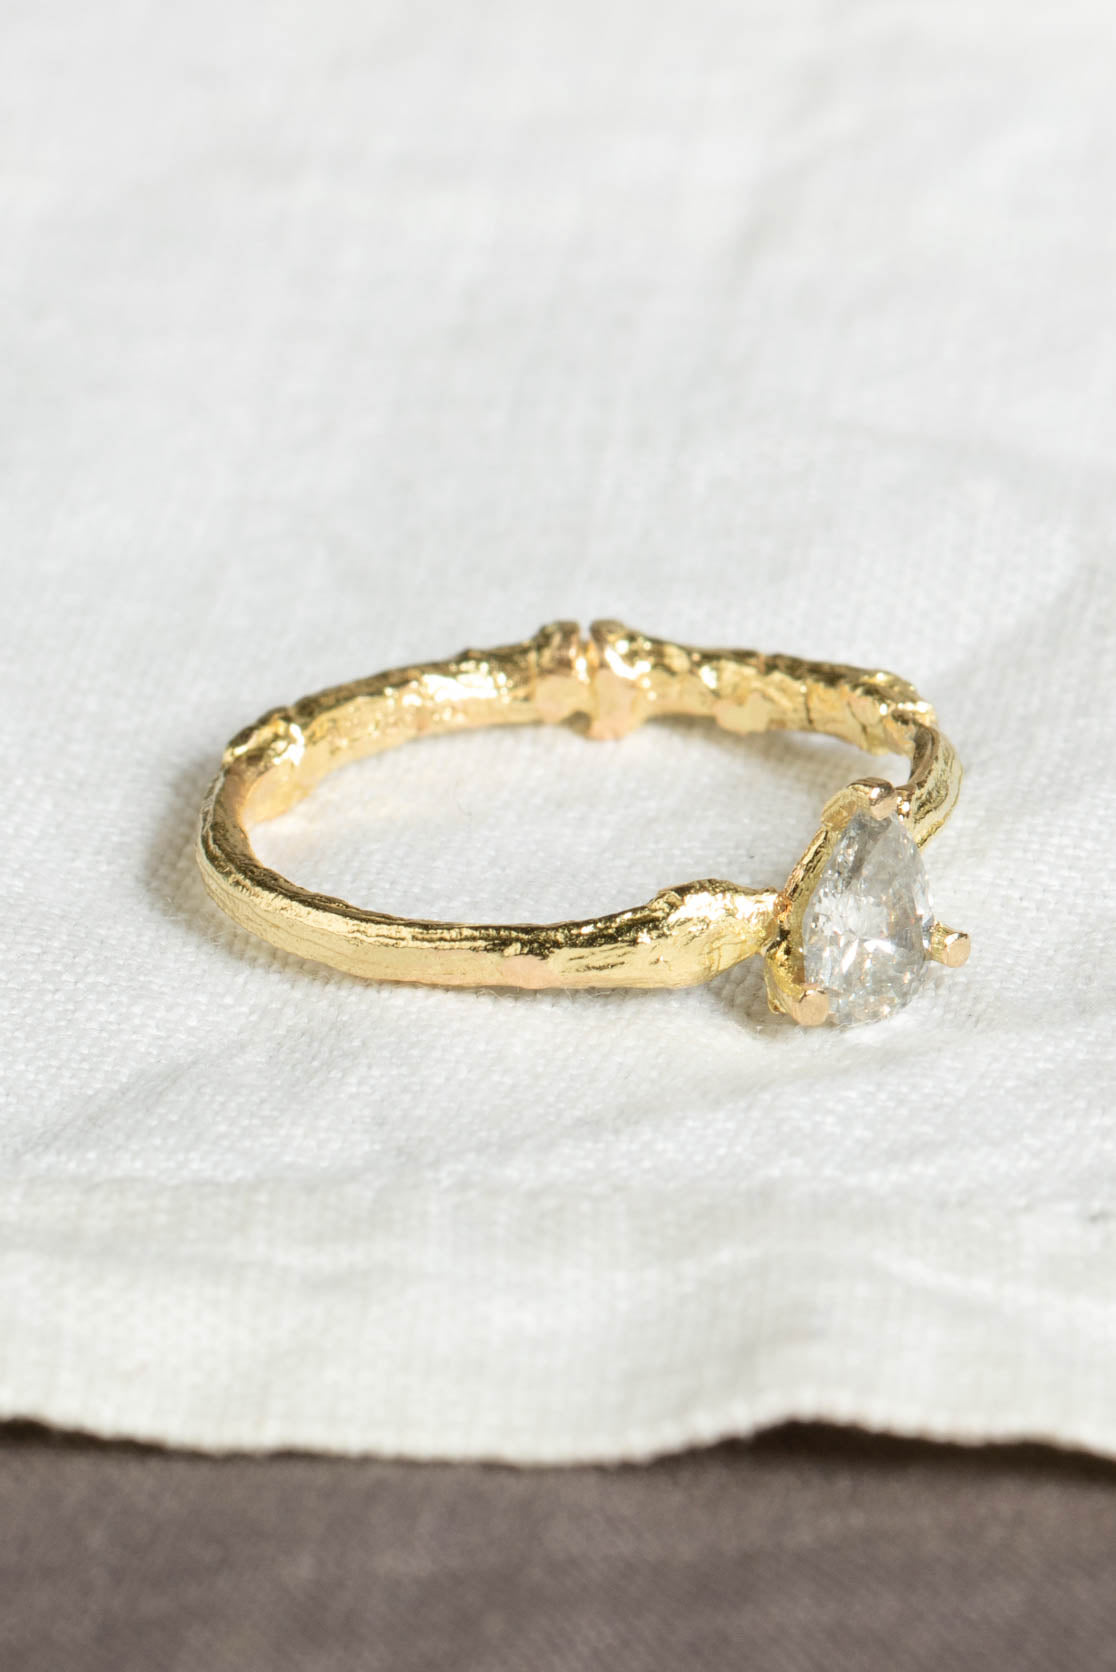 Handmade Solid Gold Twig Ring With Pear Shaped Diamond